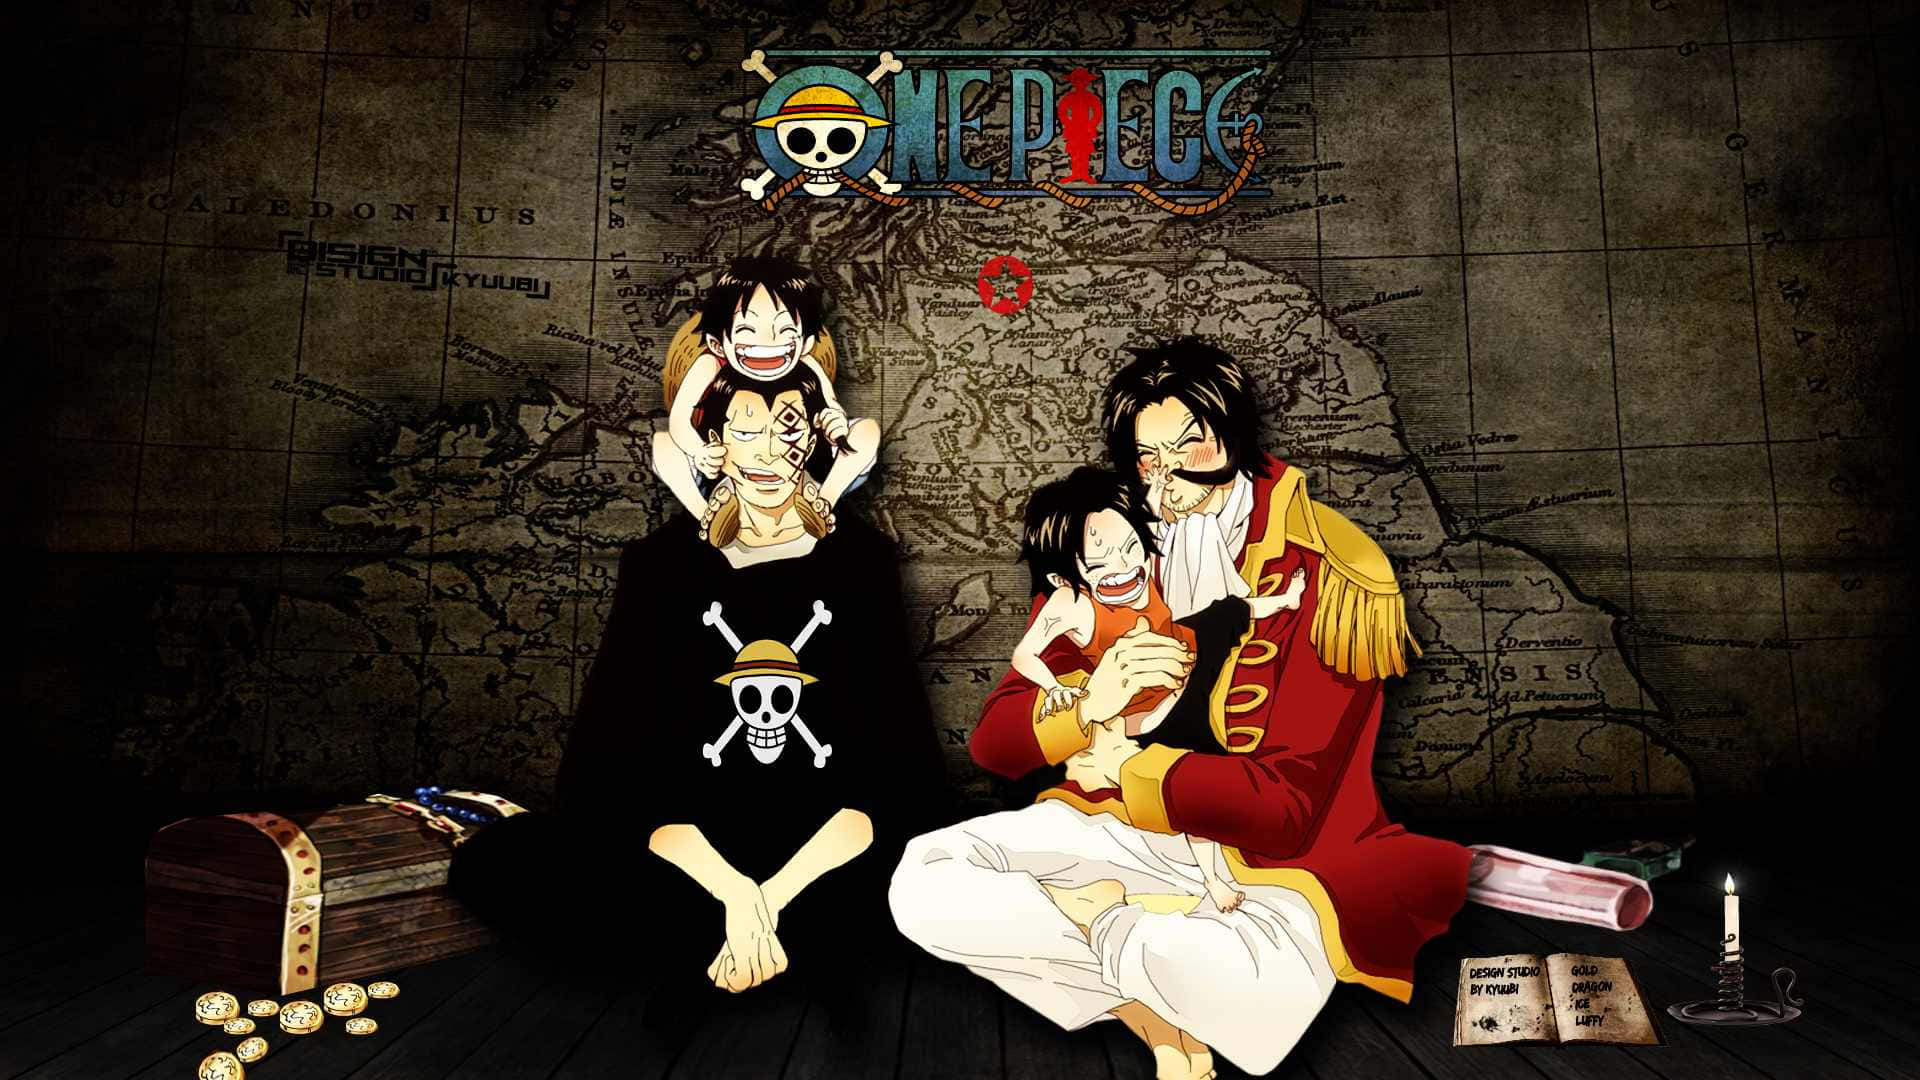 Check Out This Awesome Artwork Of Famous Pirate Luffy! Background